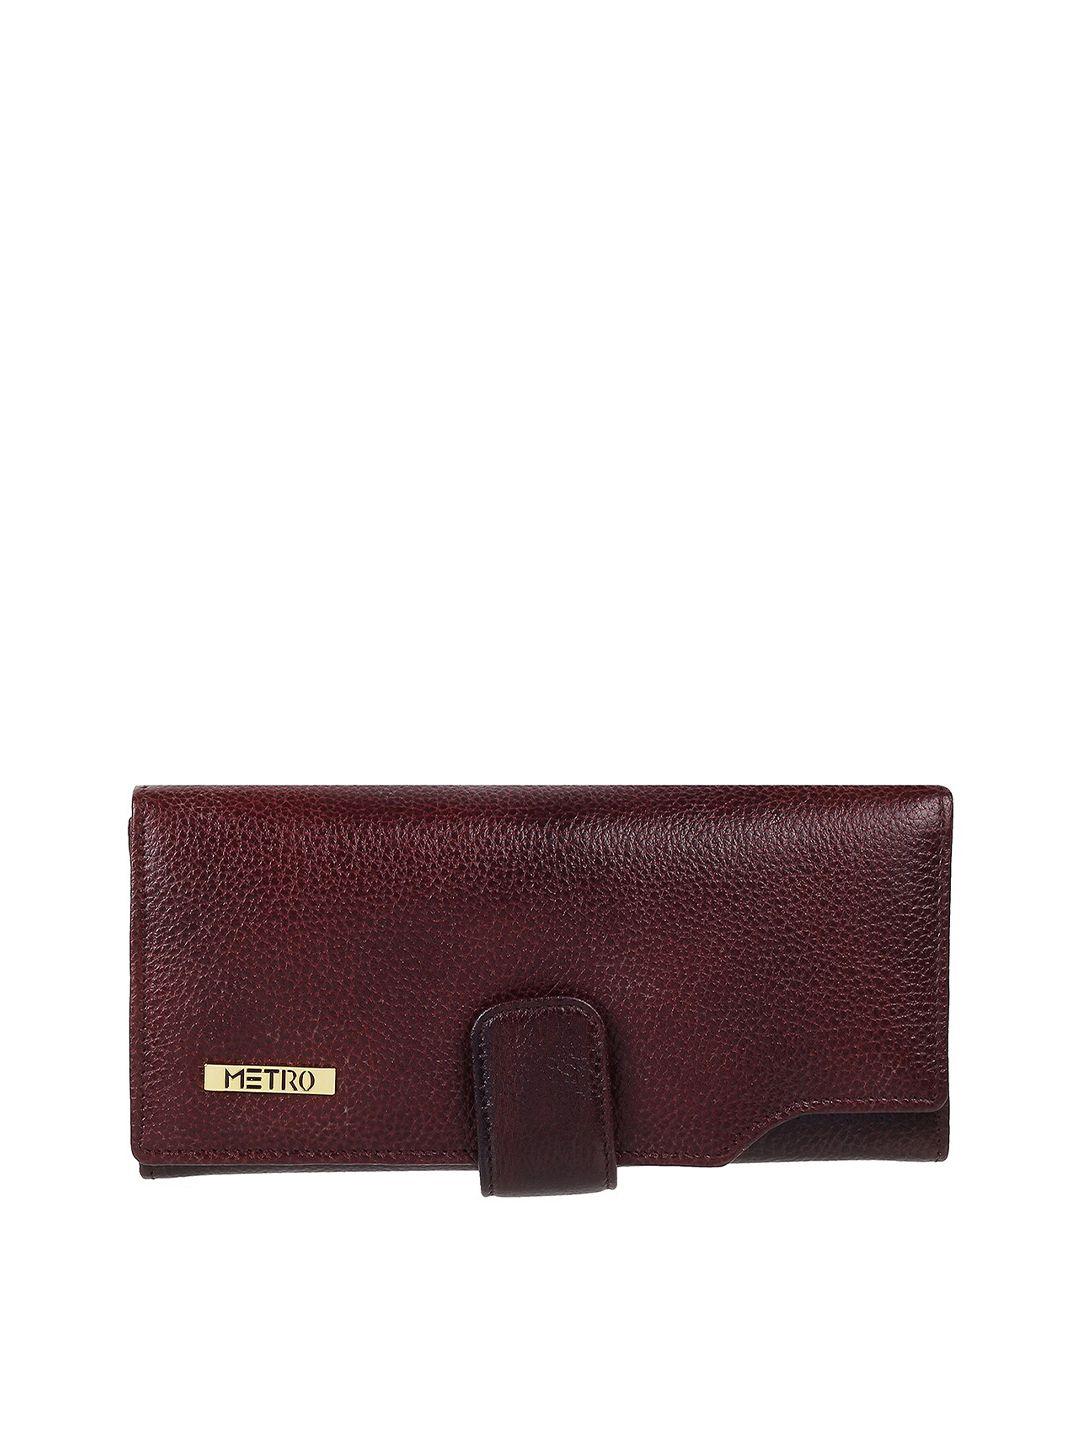 metro-women-brown-textured-leather-two-fold-wallet